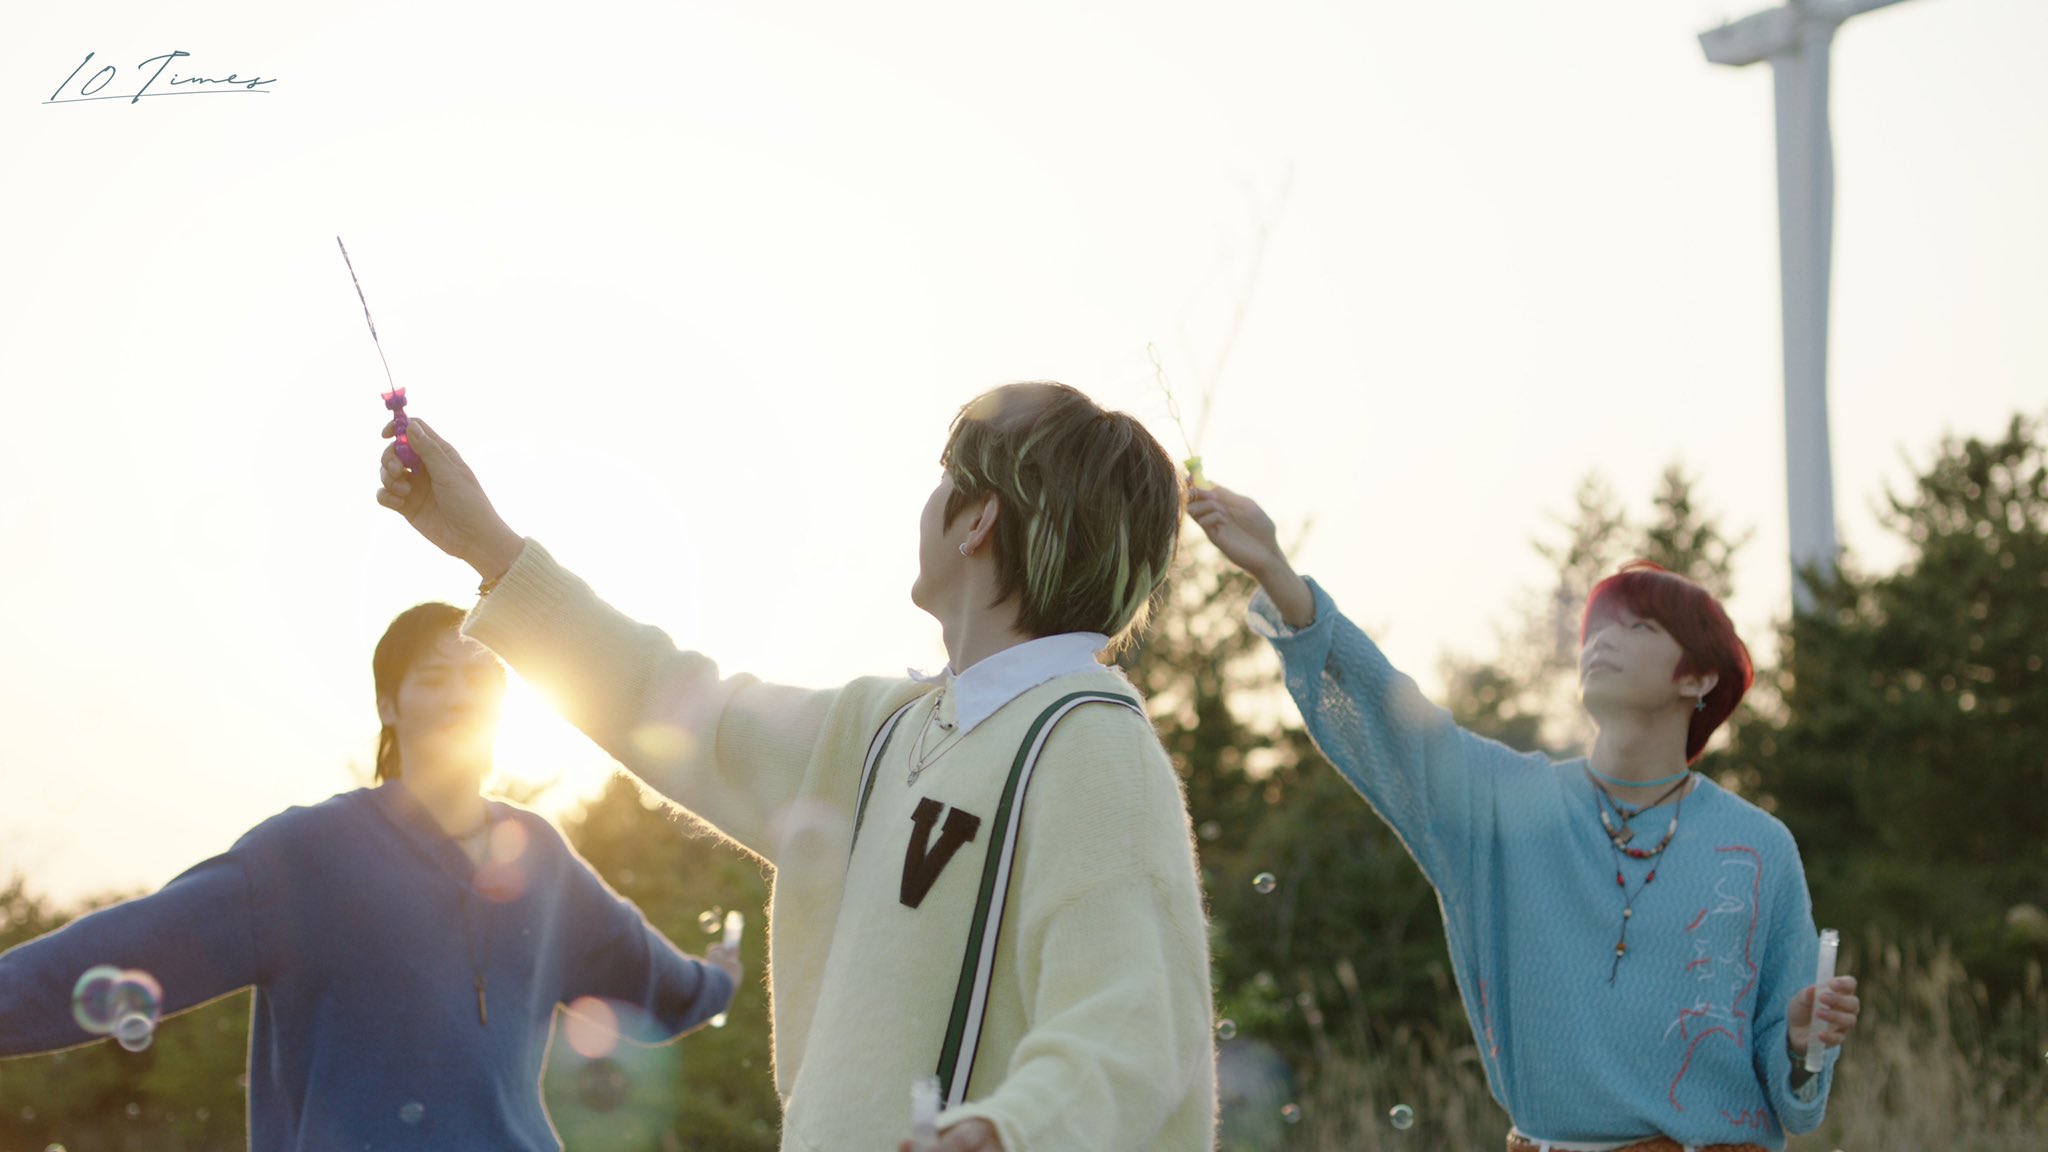 b1a4-to-mark-10th-anniversary-with-digital-single-10-times-on-april-23